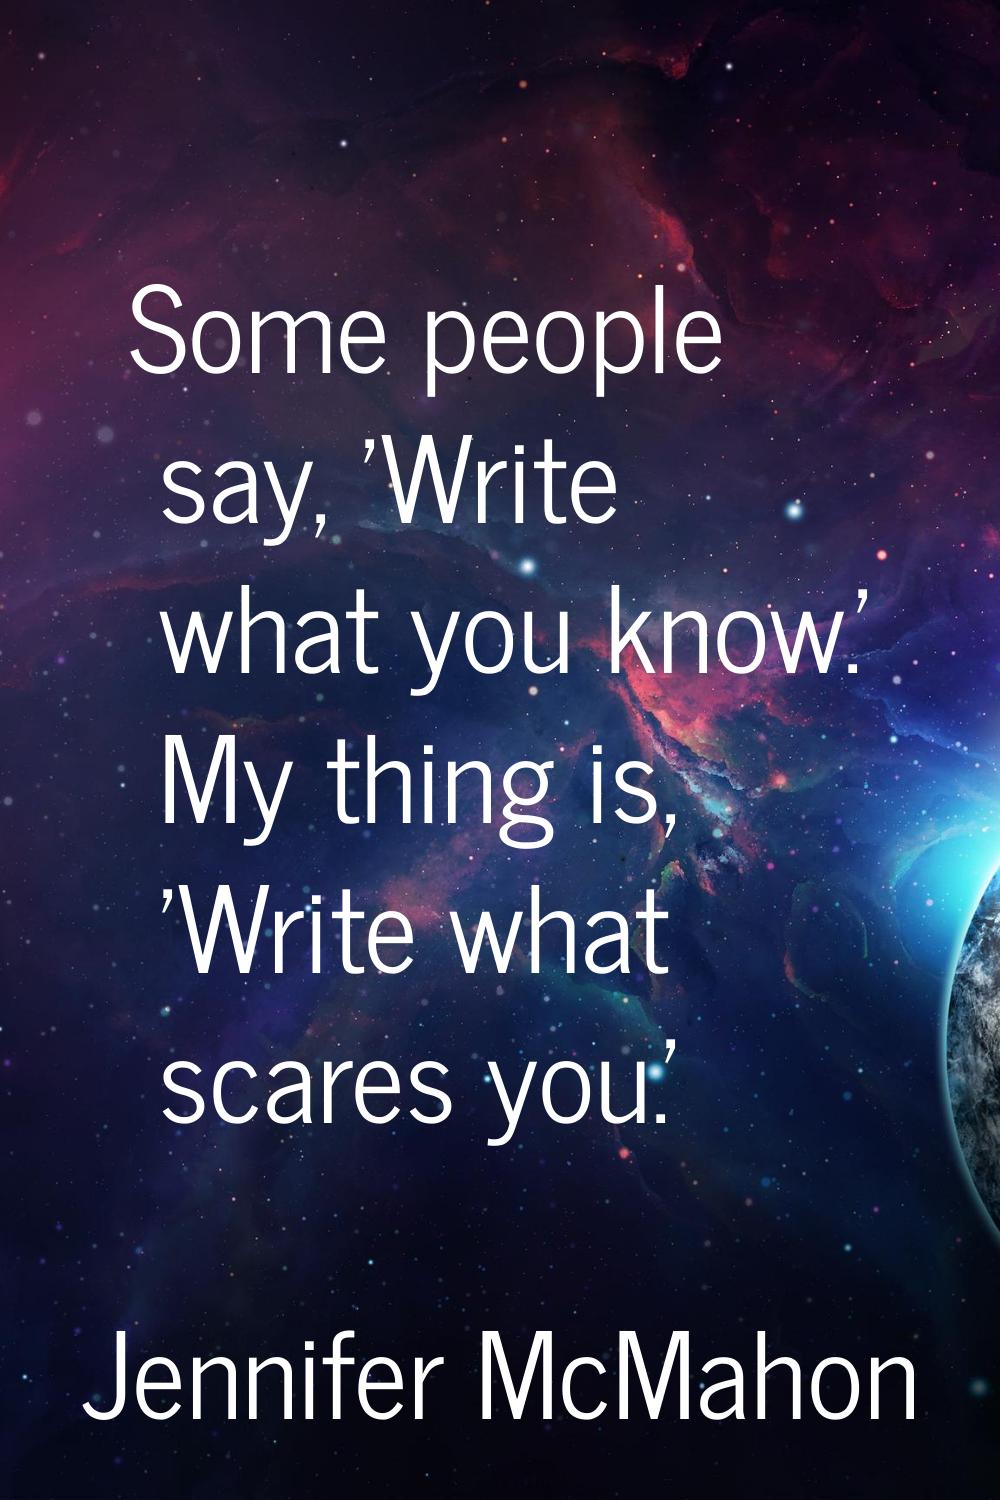 Some people say, 'Write what you know.' My thing is, 'Write what scares you.'